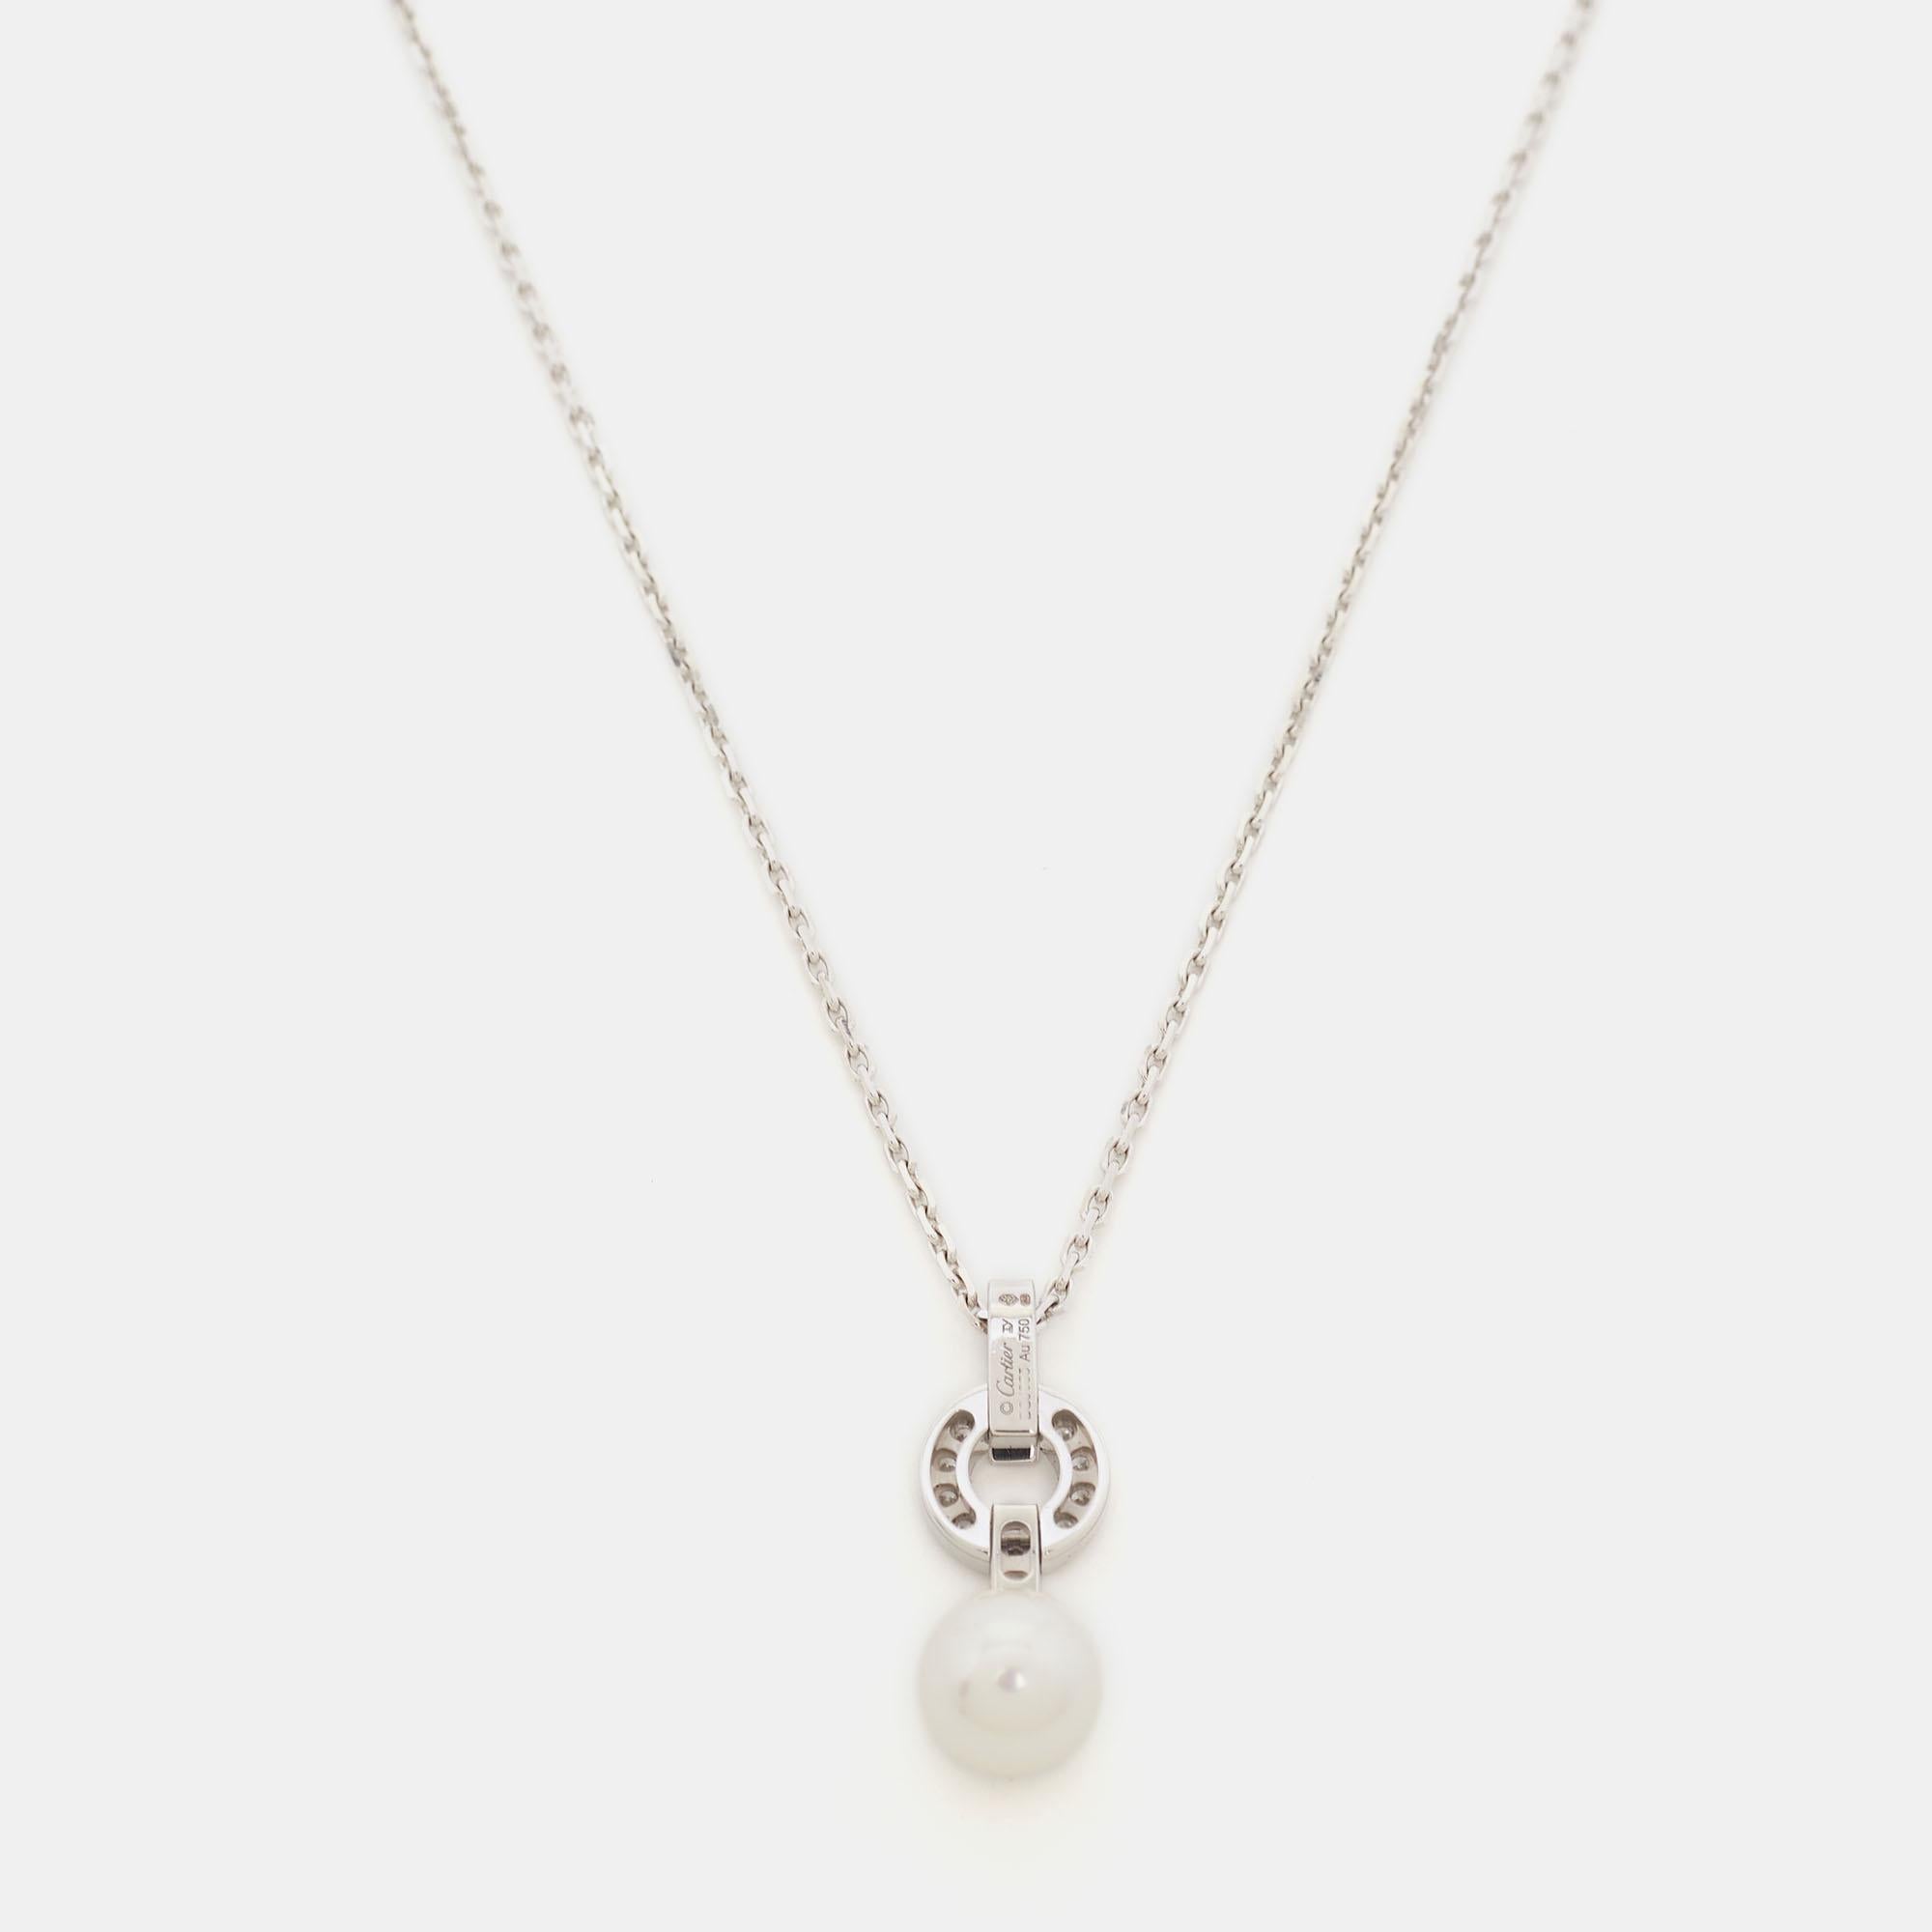 Redefining elegance, glamour, and classic styles with each of their creations, Cartier is known for owning the world's most spectacular diamonds. These sparkling diamond necklace is from the Himalia collection. It is fashioned in a minimalist design